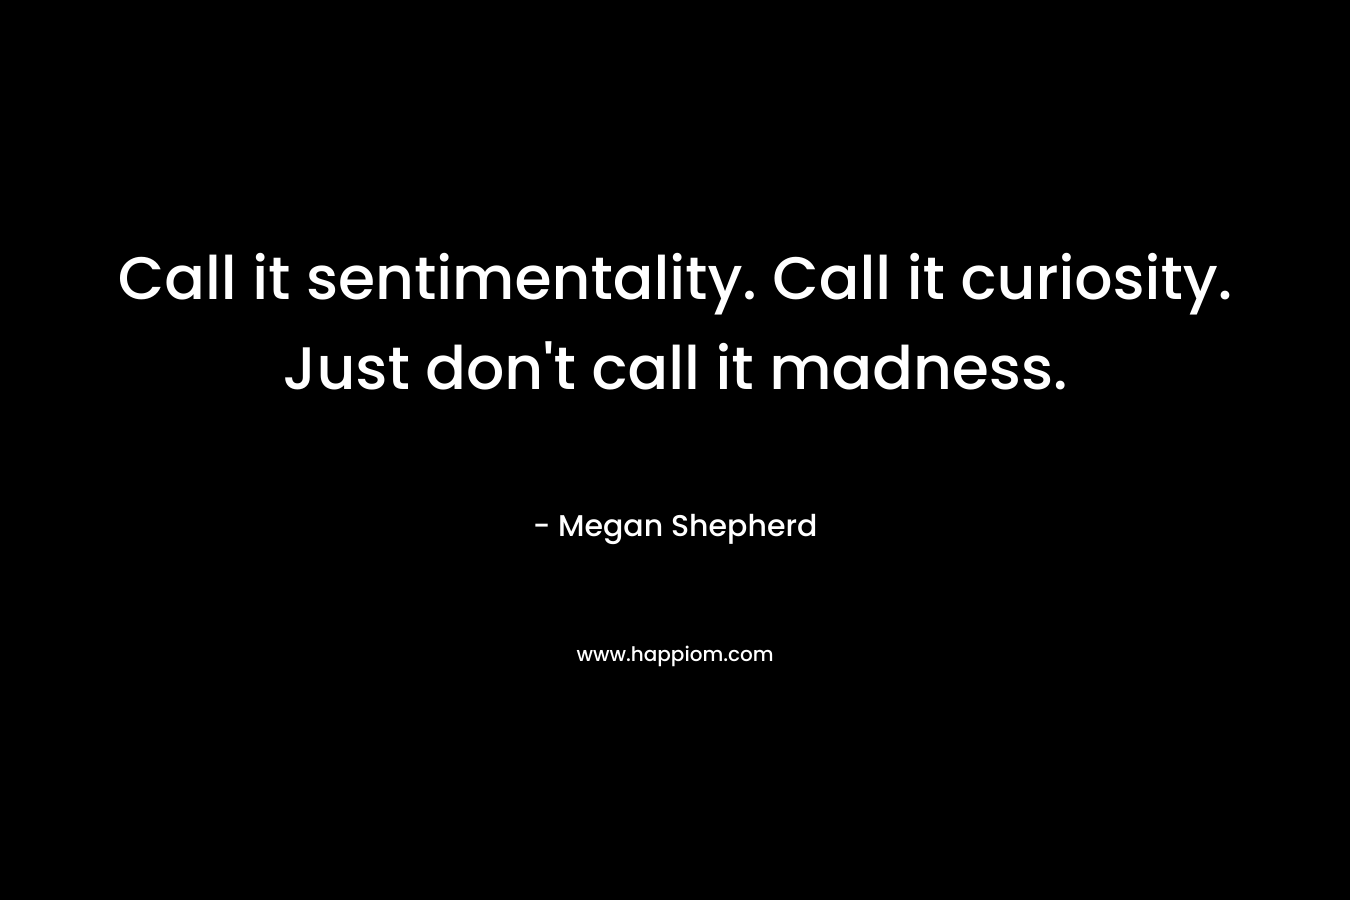 Call it sentimentality. Call it curiosity. Just don't call it madness.